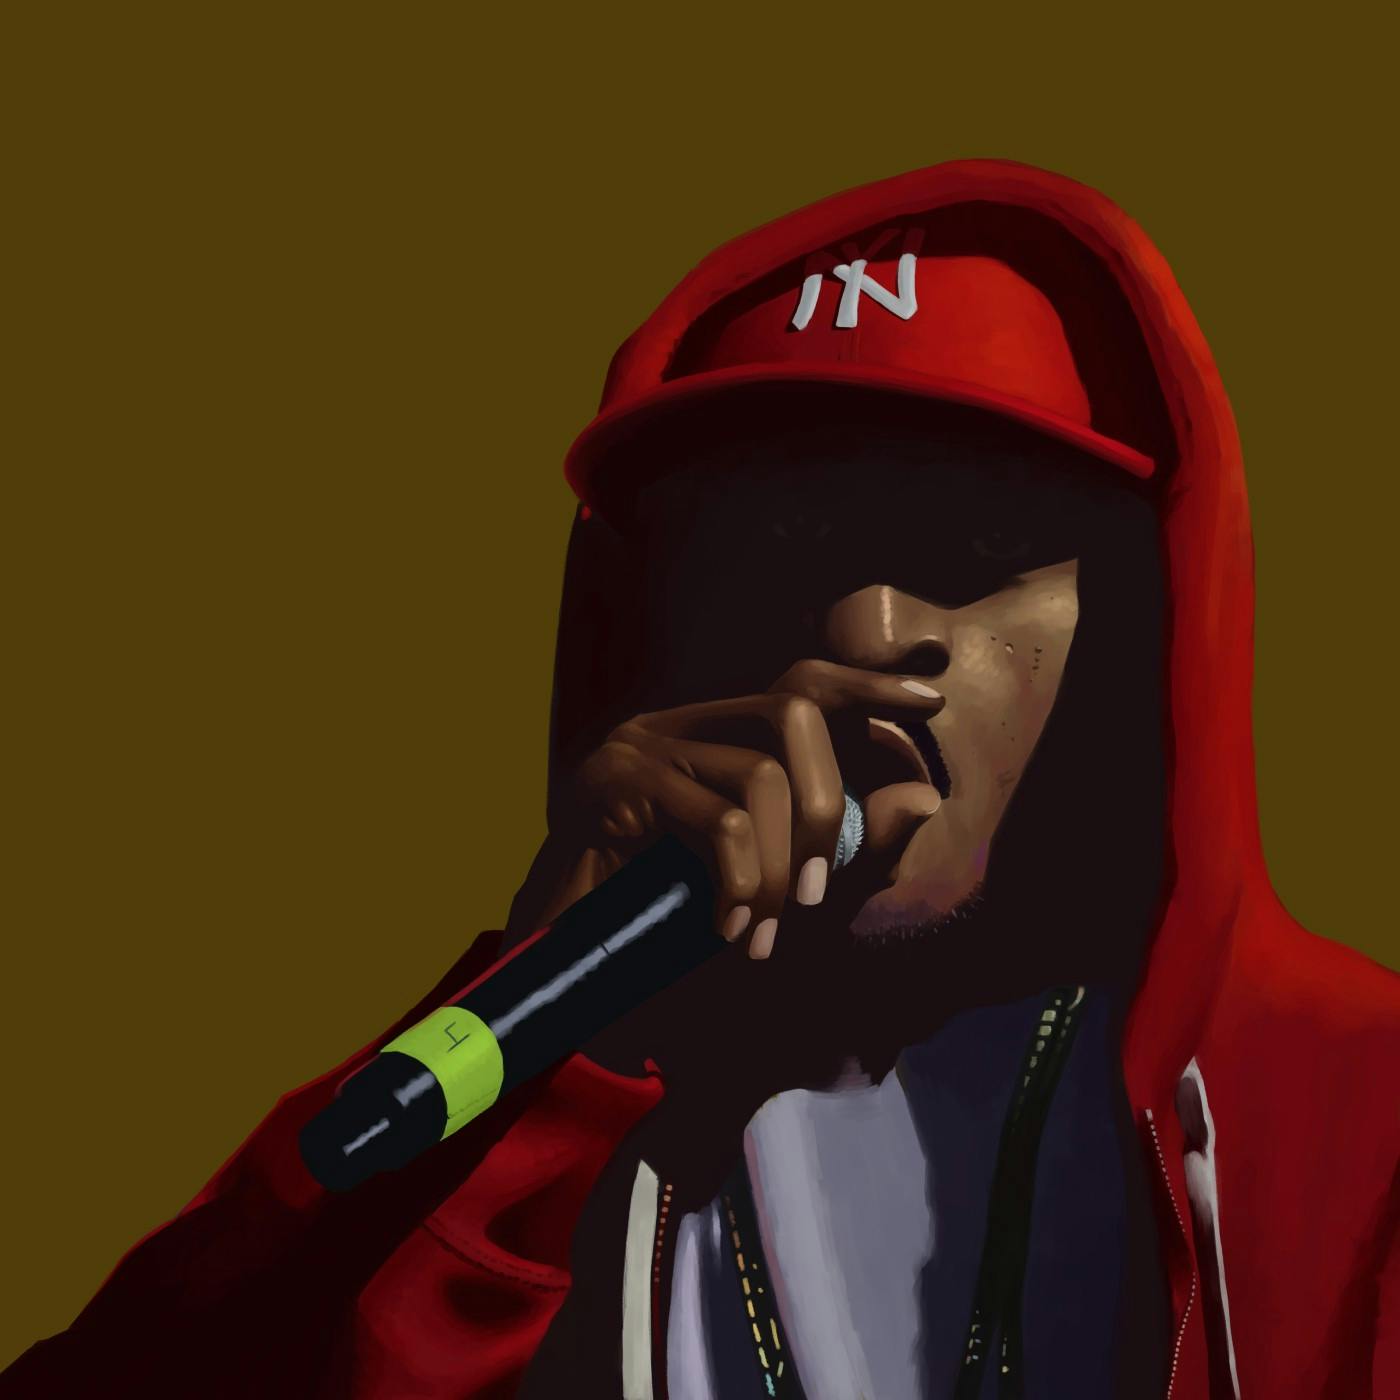 A digital painting of the rapper Rakim wearing a red hooded sweater jacket and a red NY ball cap, holding a microphone to his mouth.